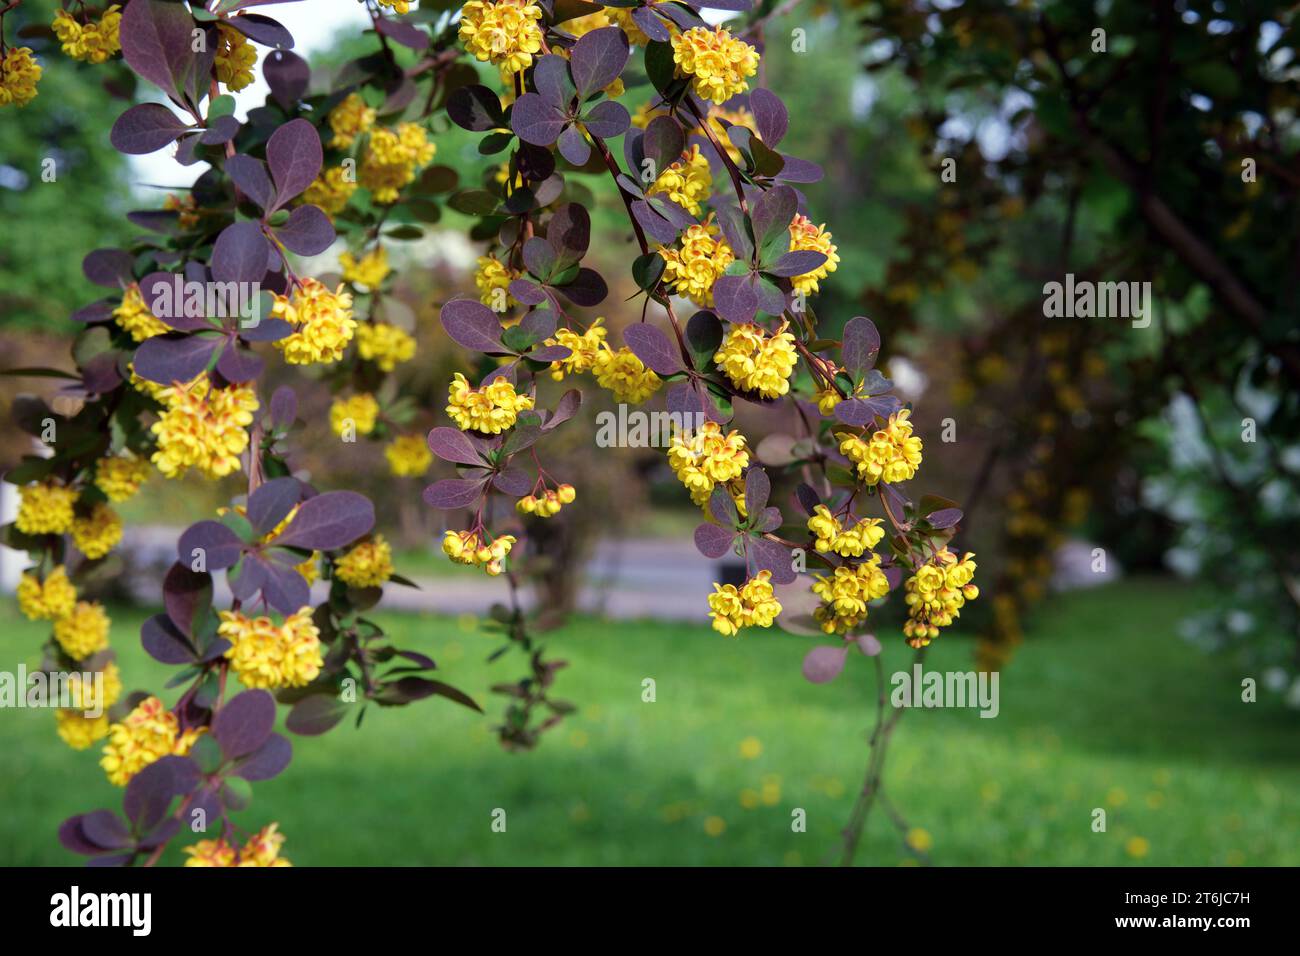 Yellow flowers of Thunberg's barberry or Japanese barberry in spring. Bright colors of spring foliage. Stock Photo